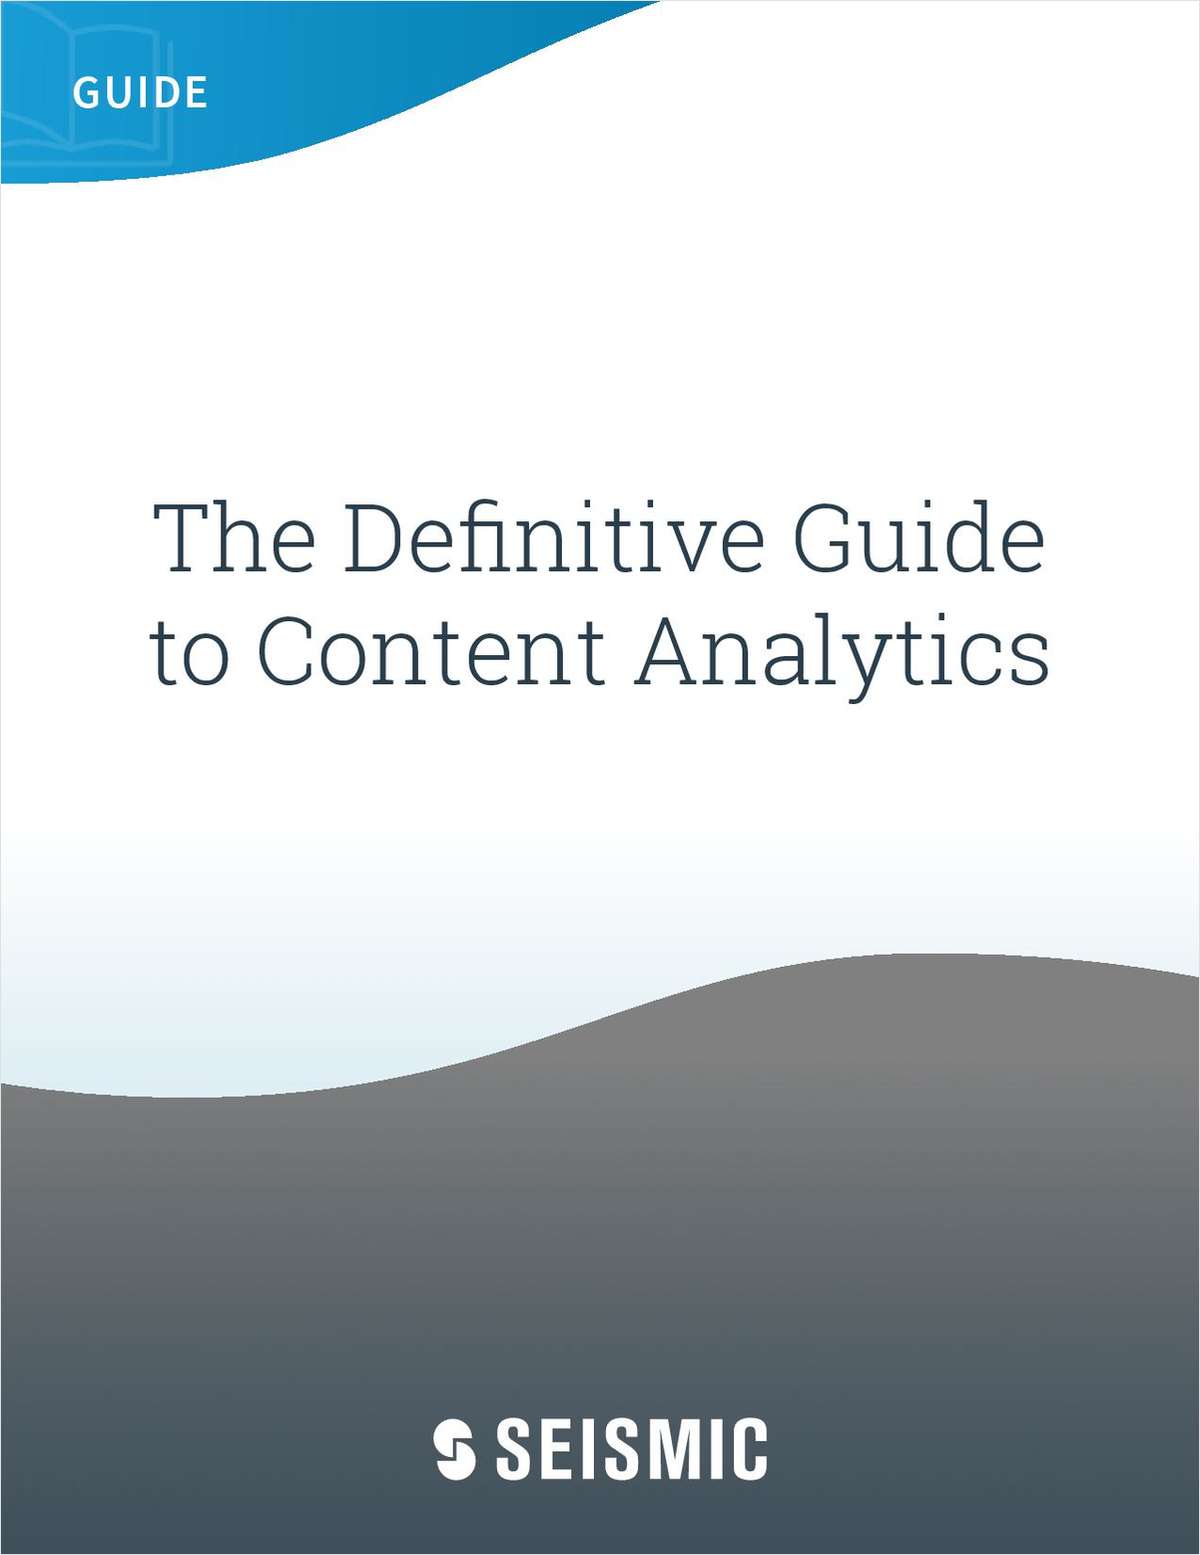 The Definitive Guide to Content Analytics